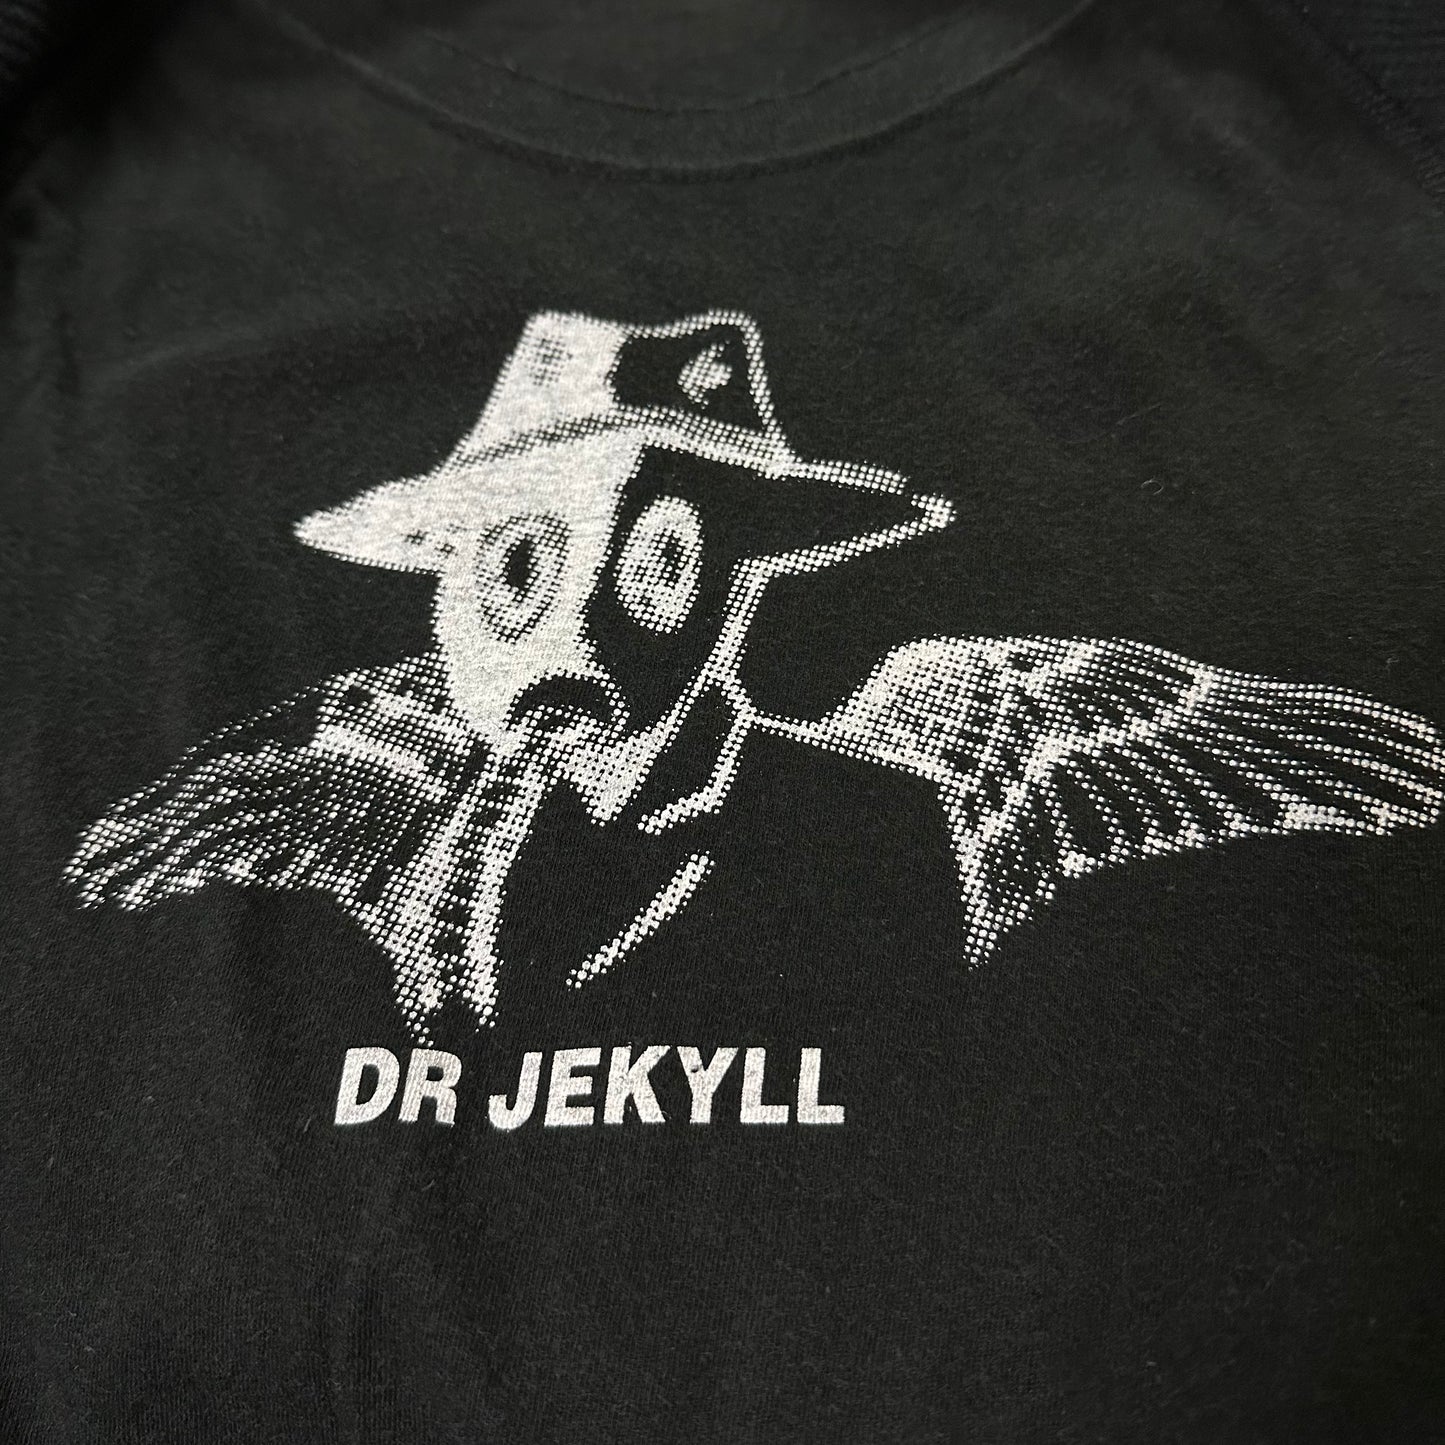 UNDERCOVER Spring Summer 2005 "But Beautiful ll" Dr. Jekyll Layered T-Shirt